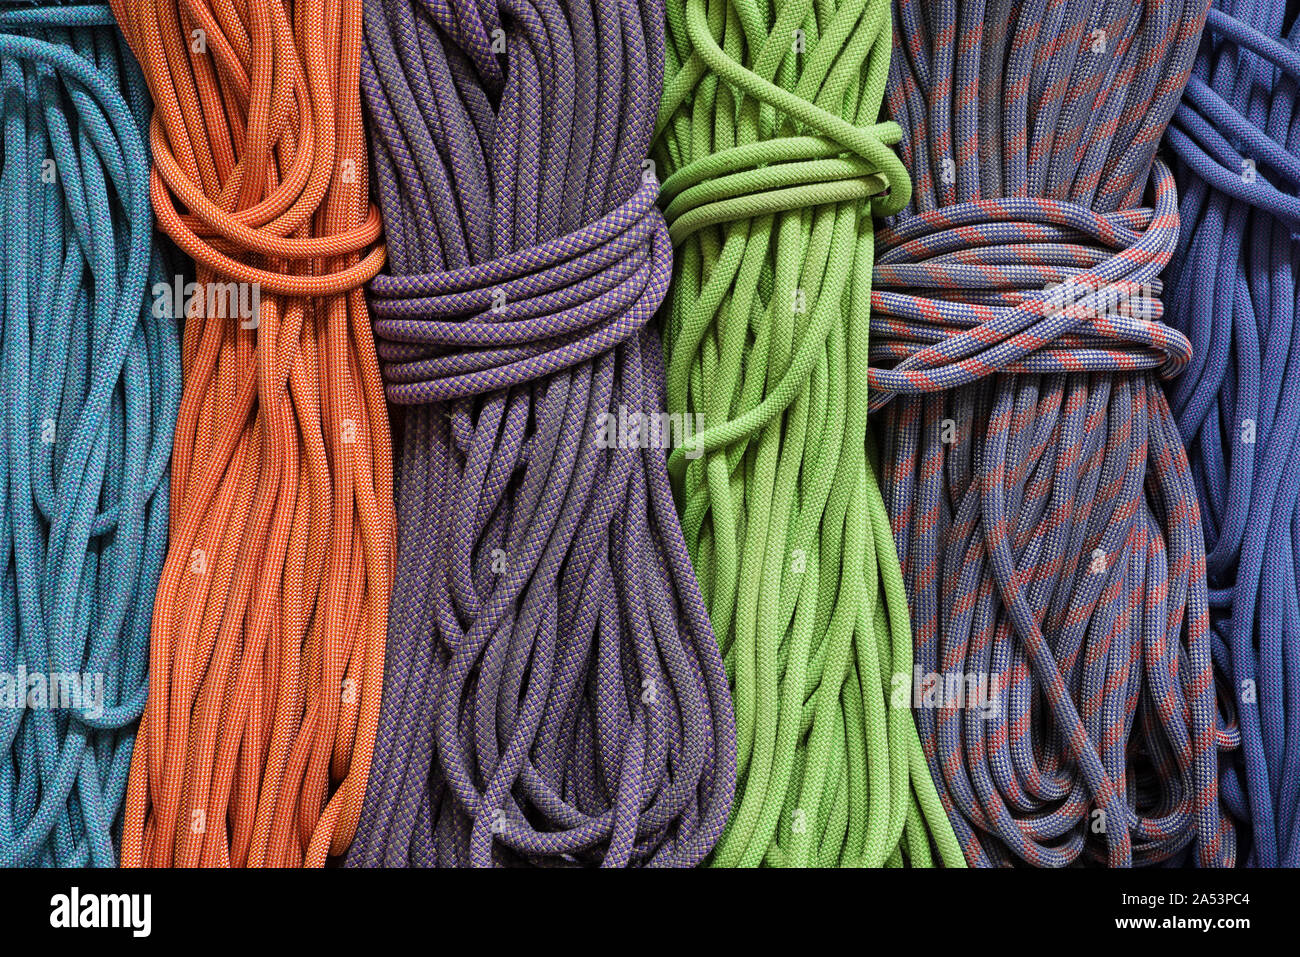 many differently colored coiled up rock climbing ropes Stock Photo